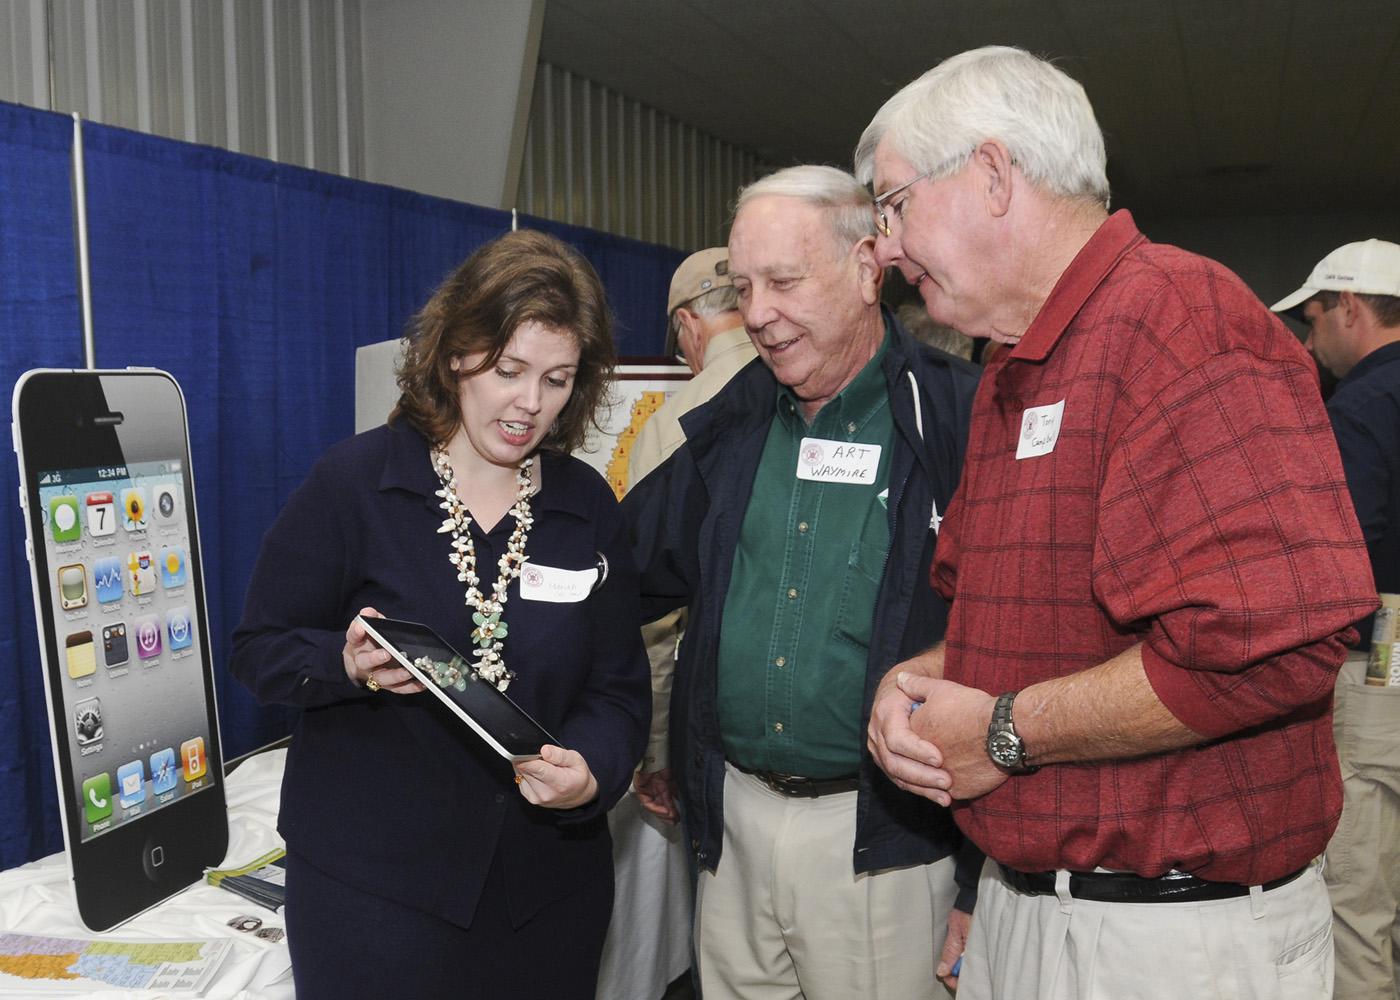 Mariah Smith (left), Extension computer applications instructor, discusses the iPad and its use in agricultural production with Art Waymire (center), a tree farmer from Marshall County, and Tony Campbell, a cotton and soybean farmer from Itawamba County. (Photo by Scott Corey)